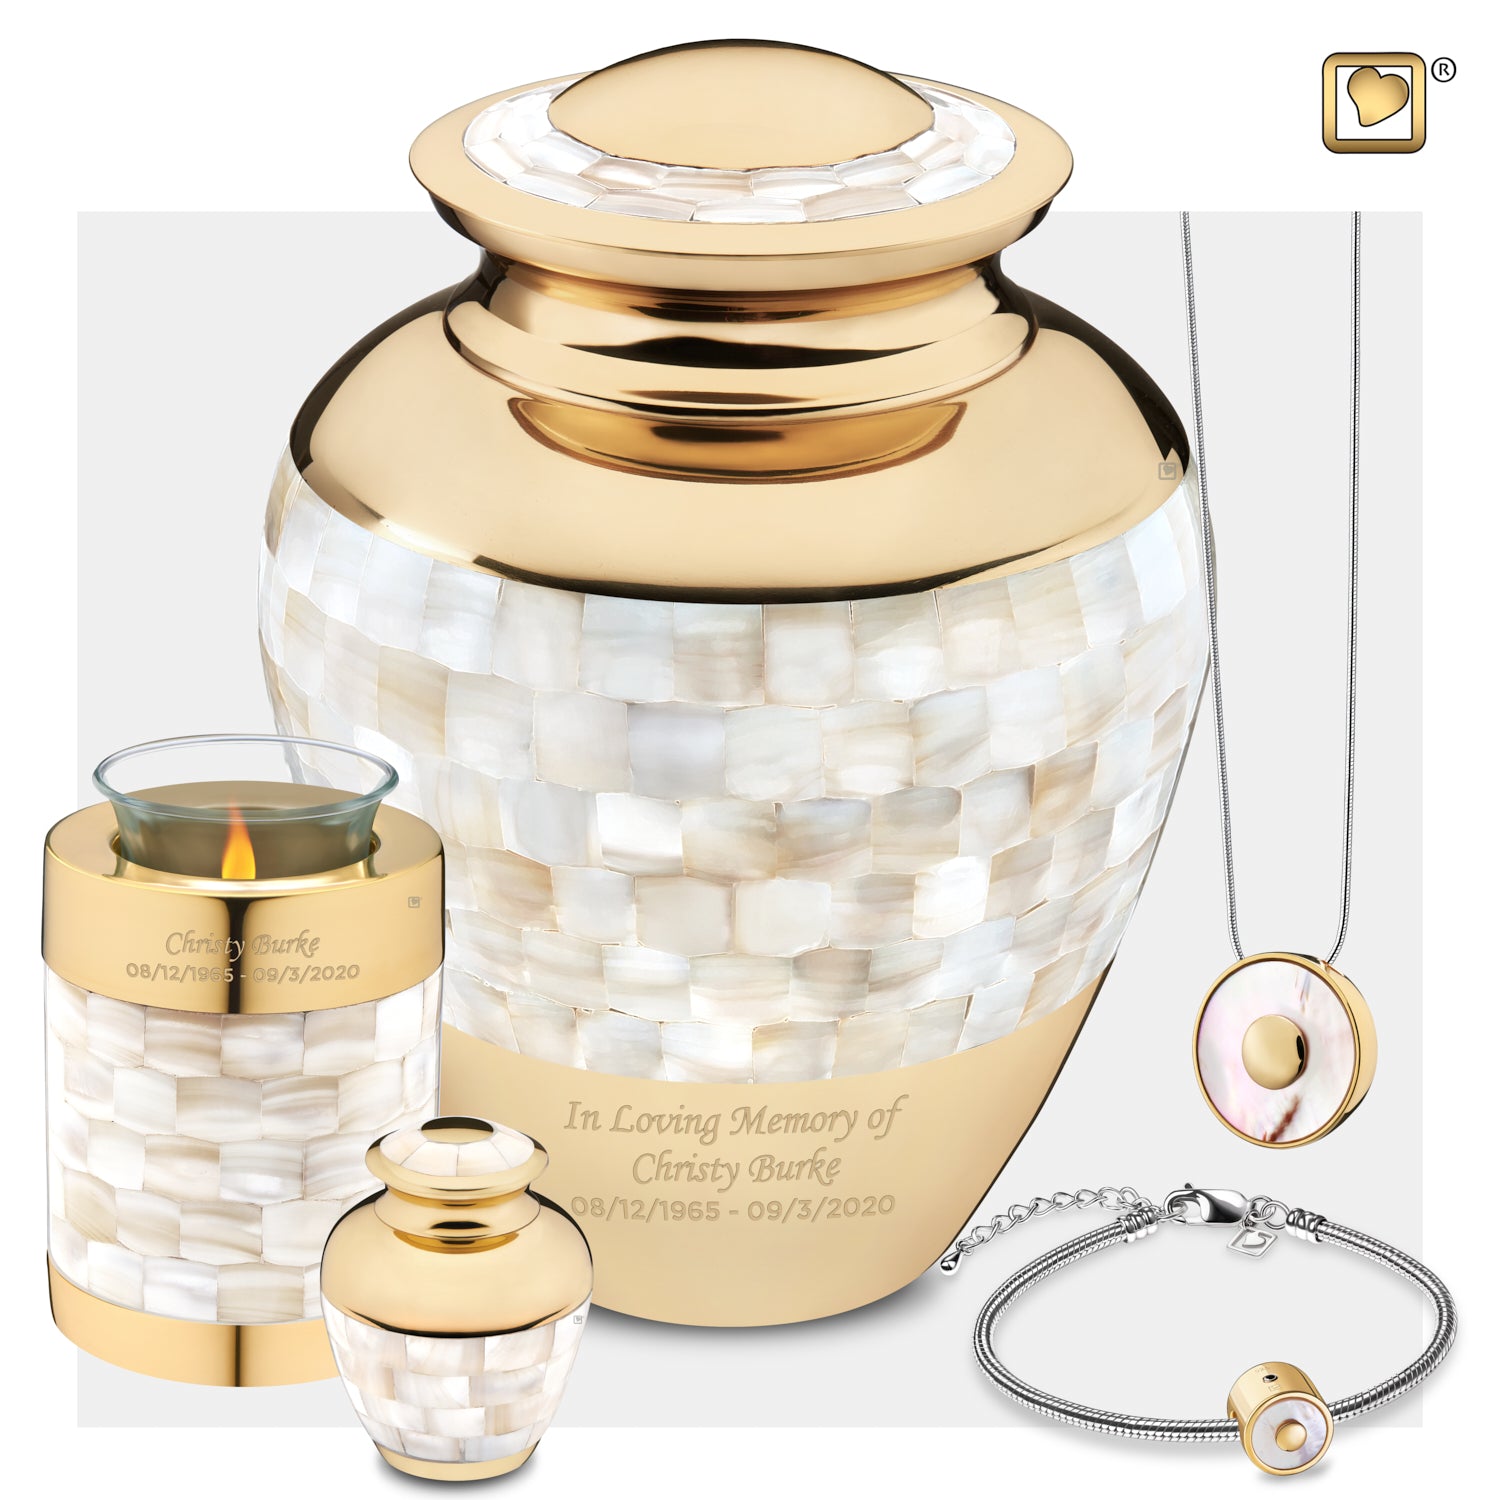 Medium Mother of Pearl Cremation Urn